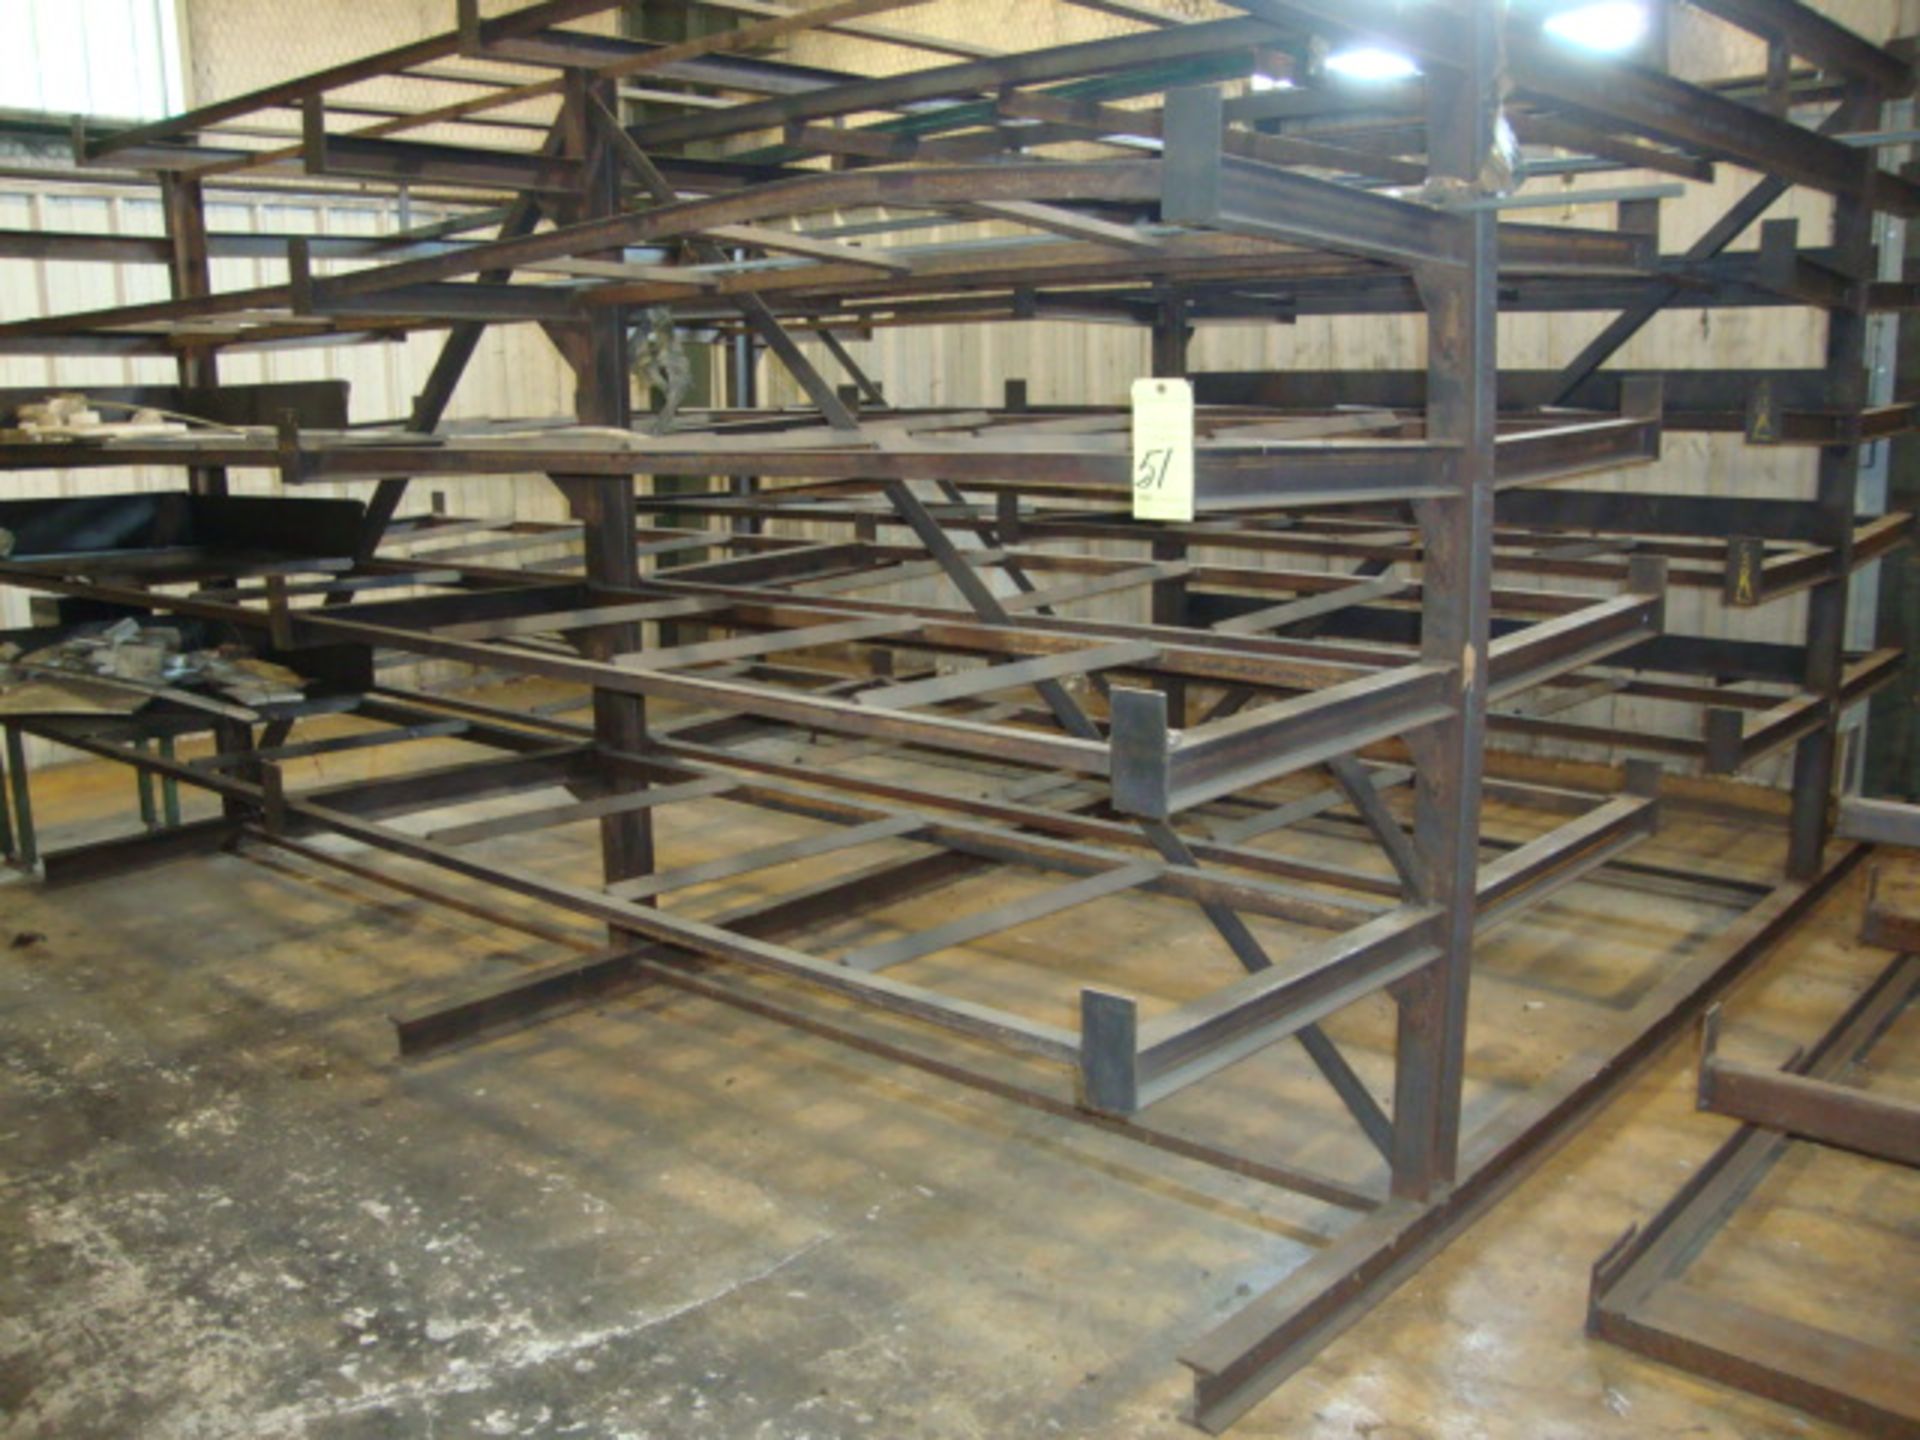 WELDED CANTILEVER STEEL STOCK RACK, 166" x 170" x 87" ht. 30" arms